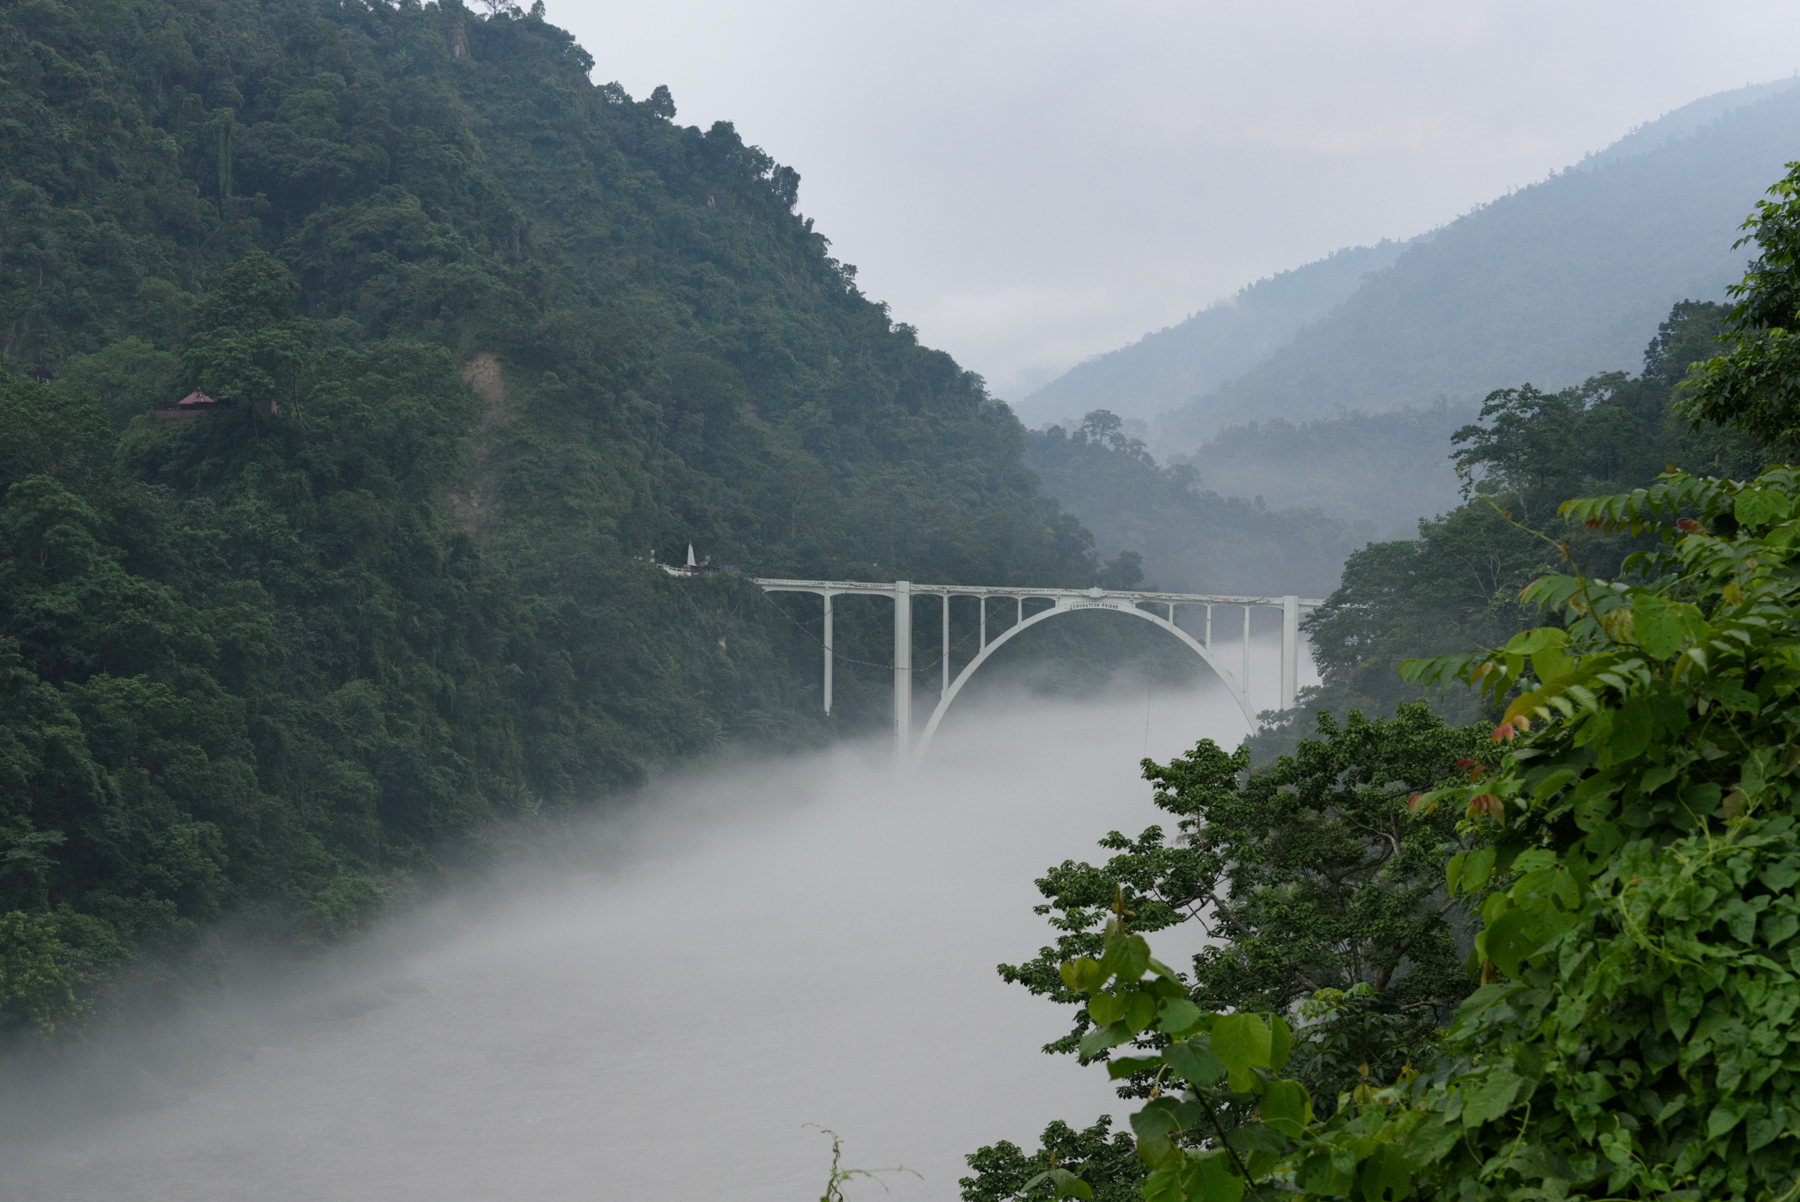  The Coronation bridge at Sevoke connects the city of Silliguri with the Dooars region.  Traffickers often use this route to take the girls from the tea estates to Sikkim and other parts of India. 